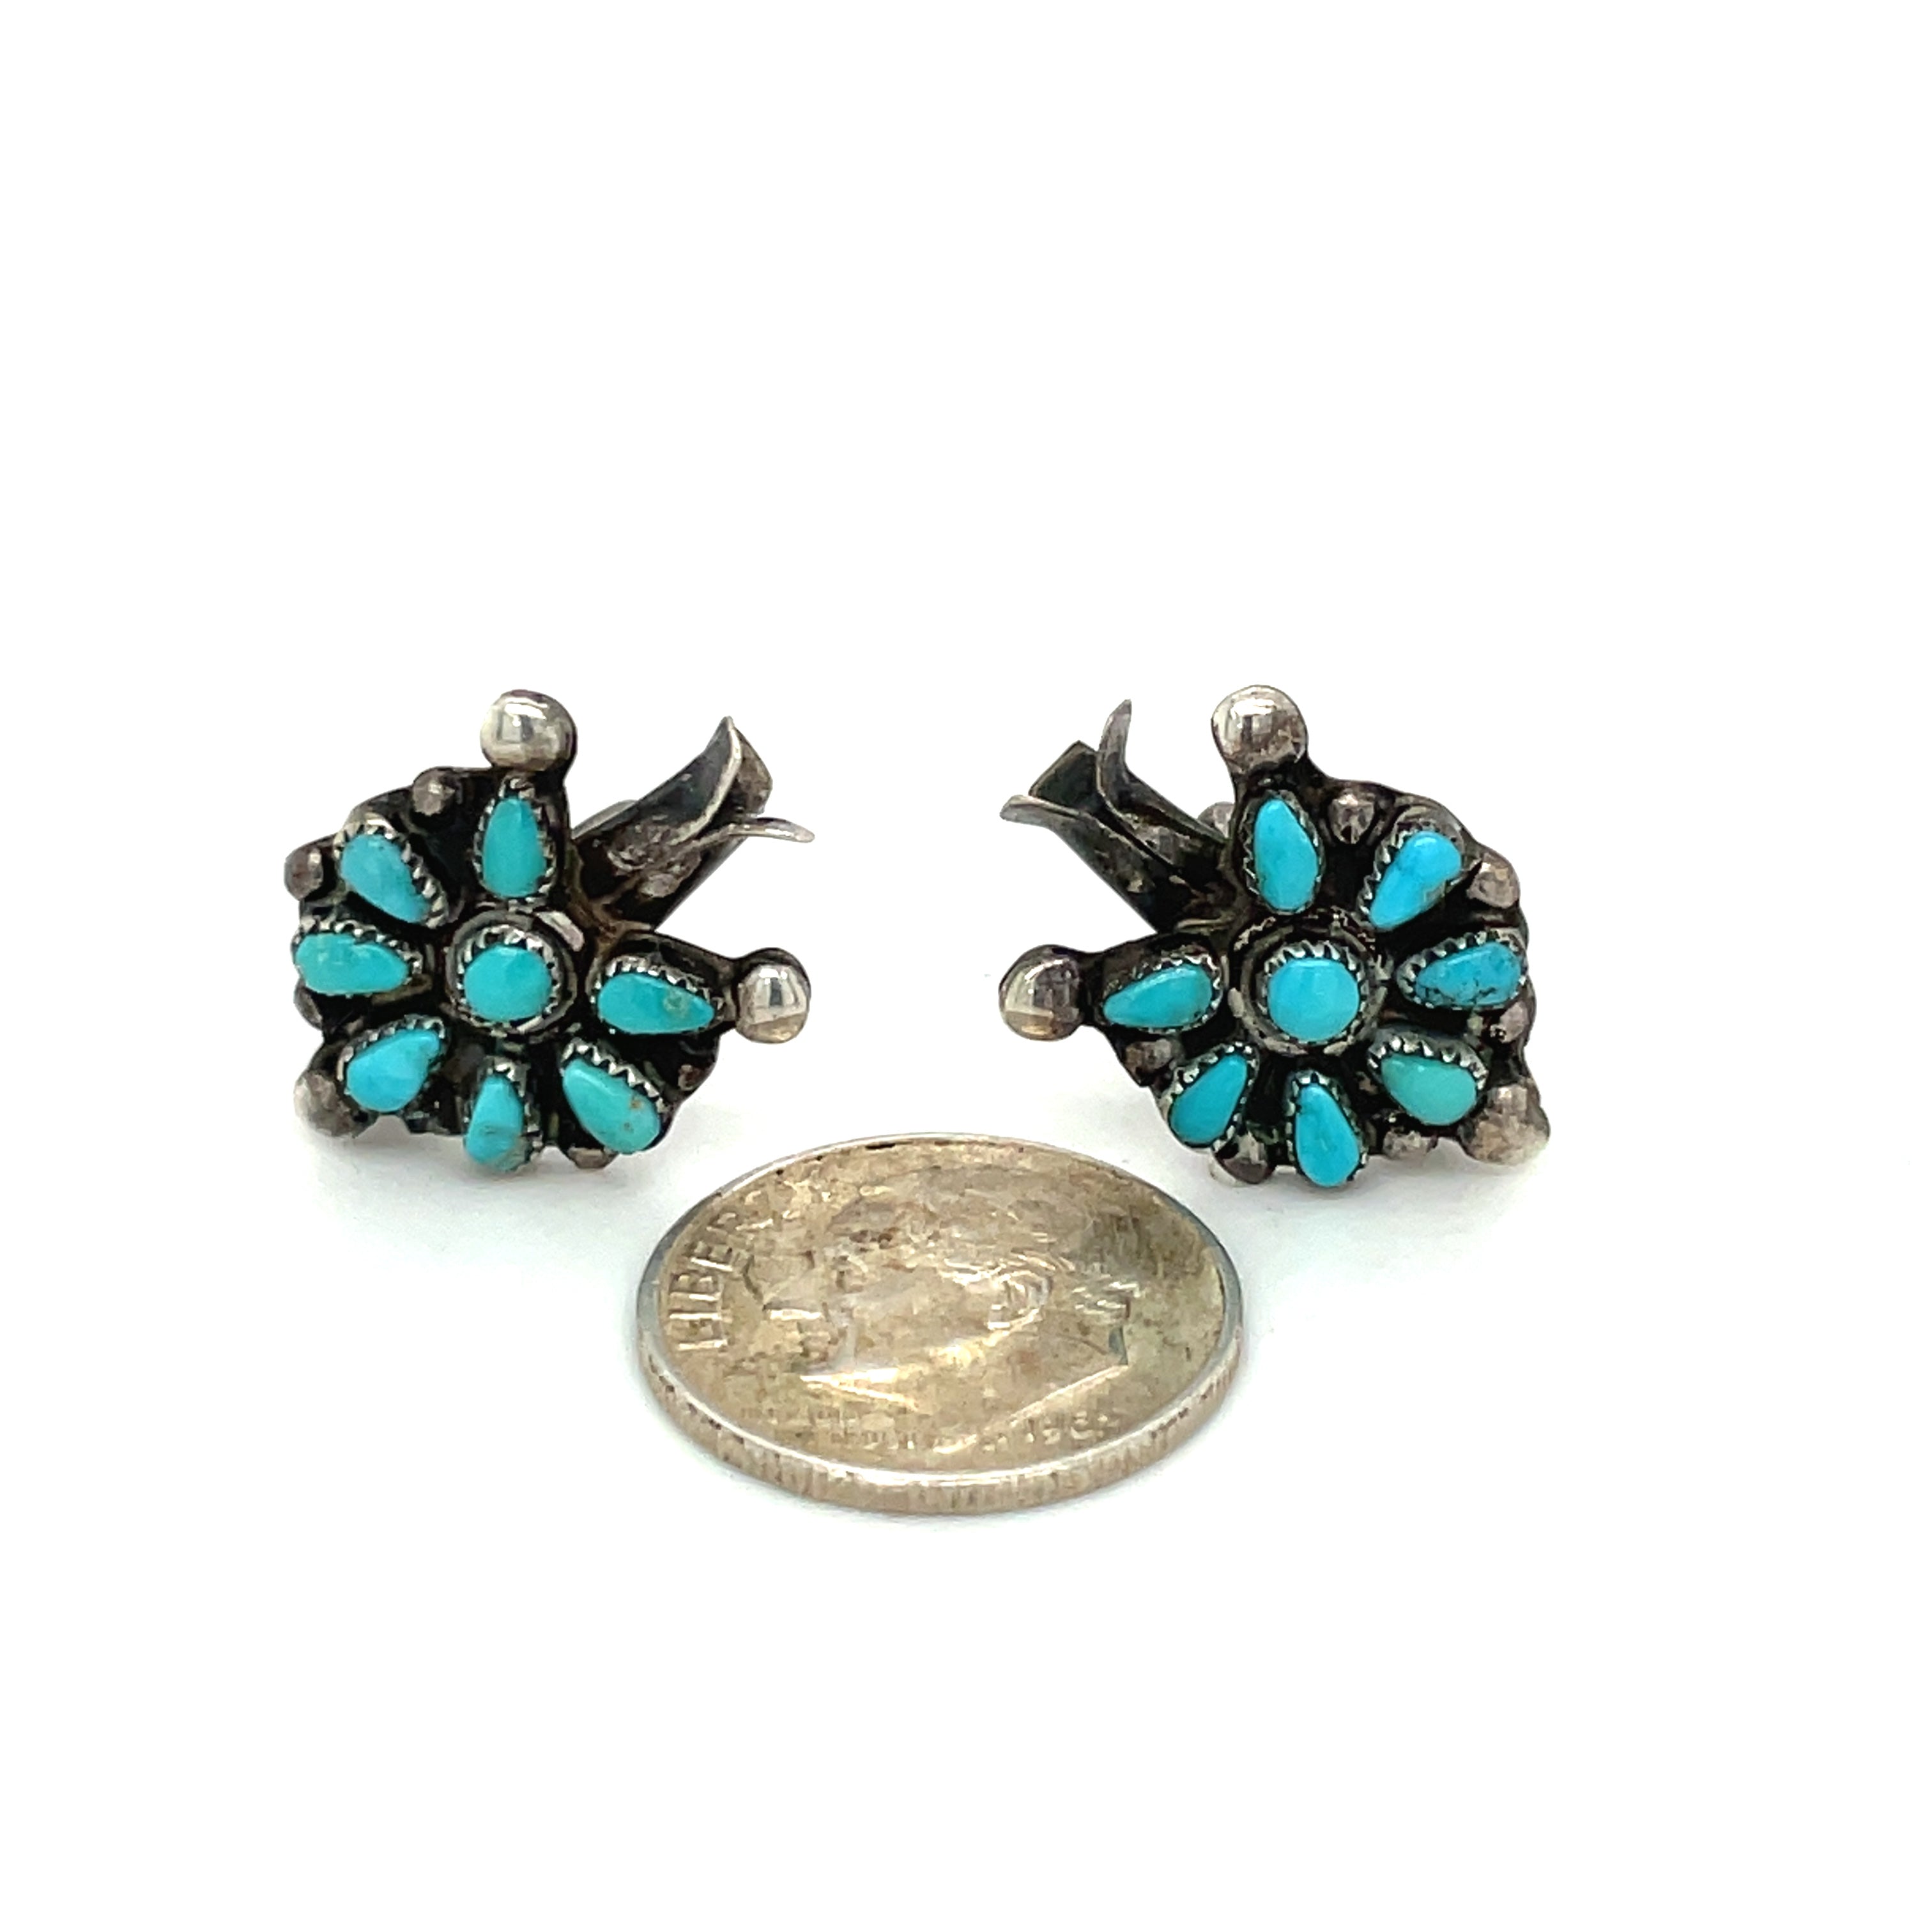 Vintage Southwestern Sterling Silver and Turquoise Screw Back Earrings | Jewelry | Old Silver and Gold